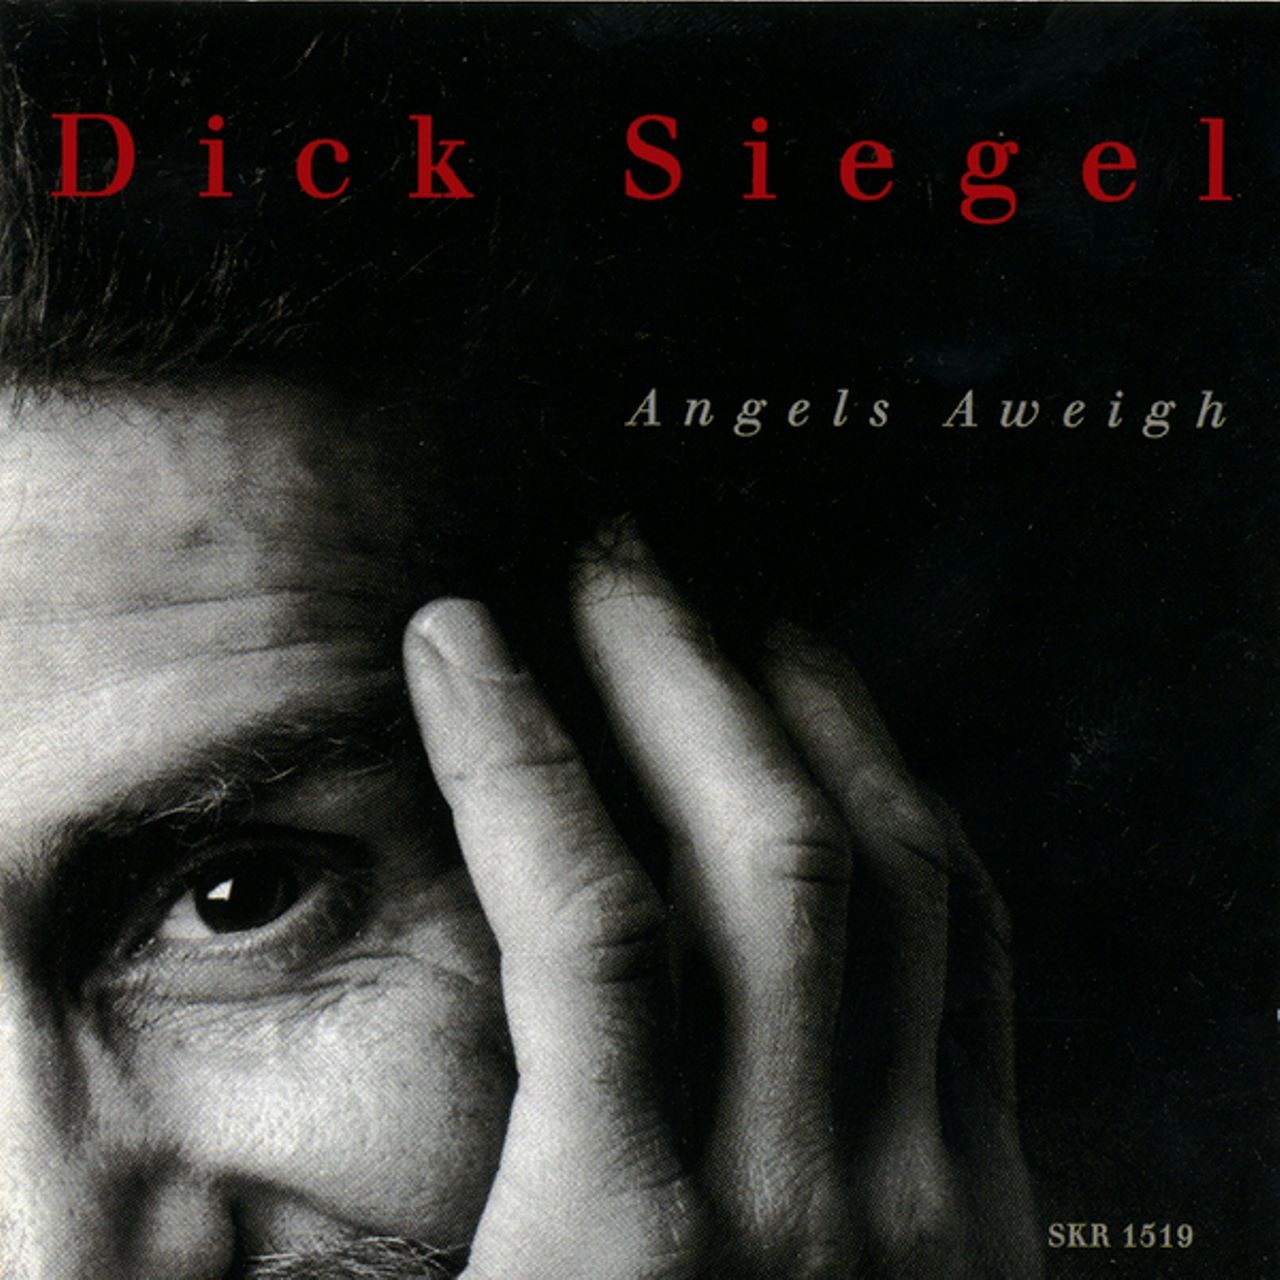 Dick Siegel - Angels Aweigh cover album